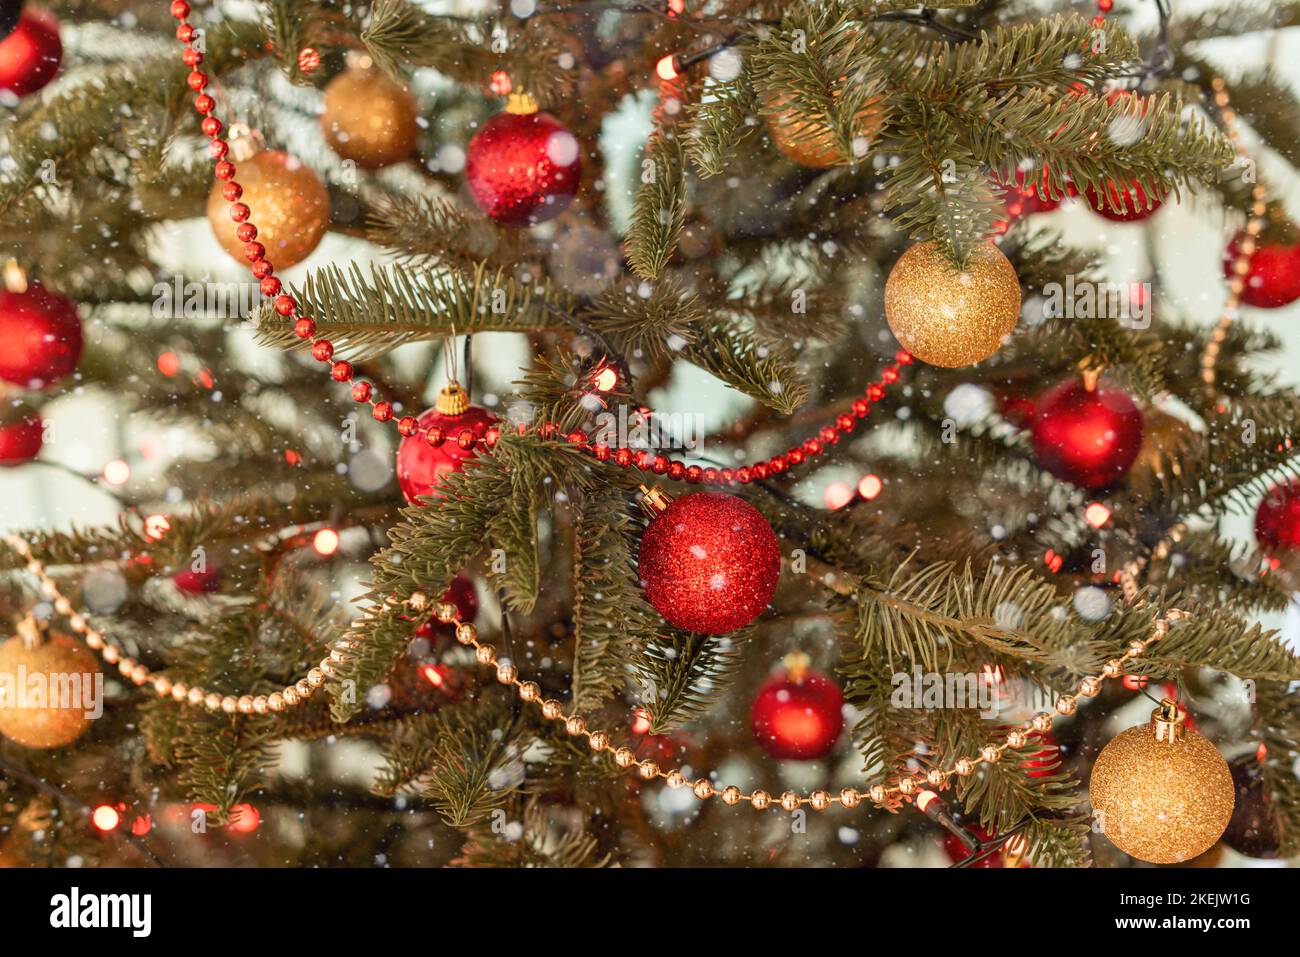 Part of a Christmas tree decorated with lights and red and gold balls Stock Photo